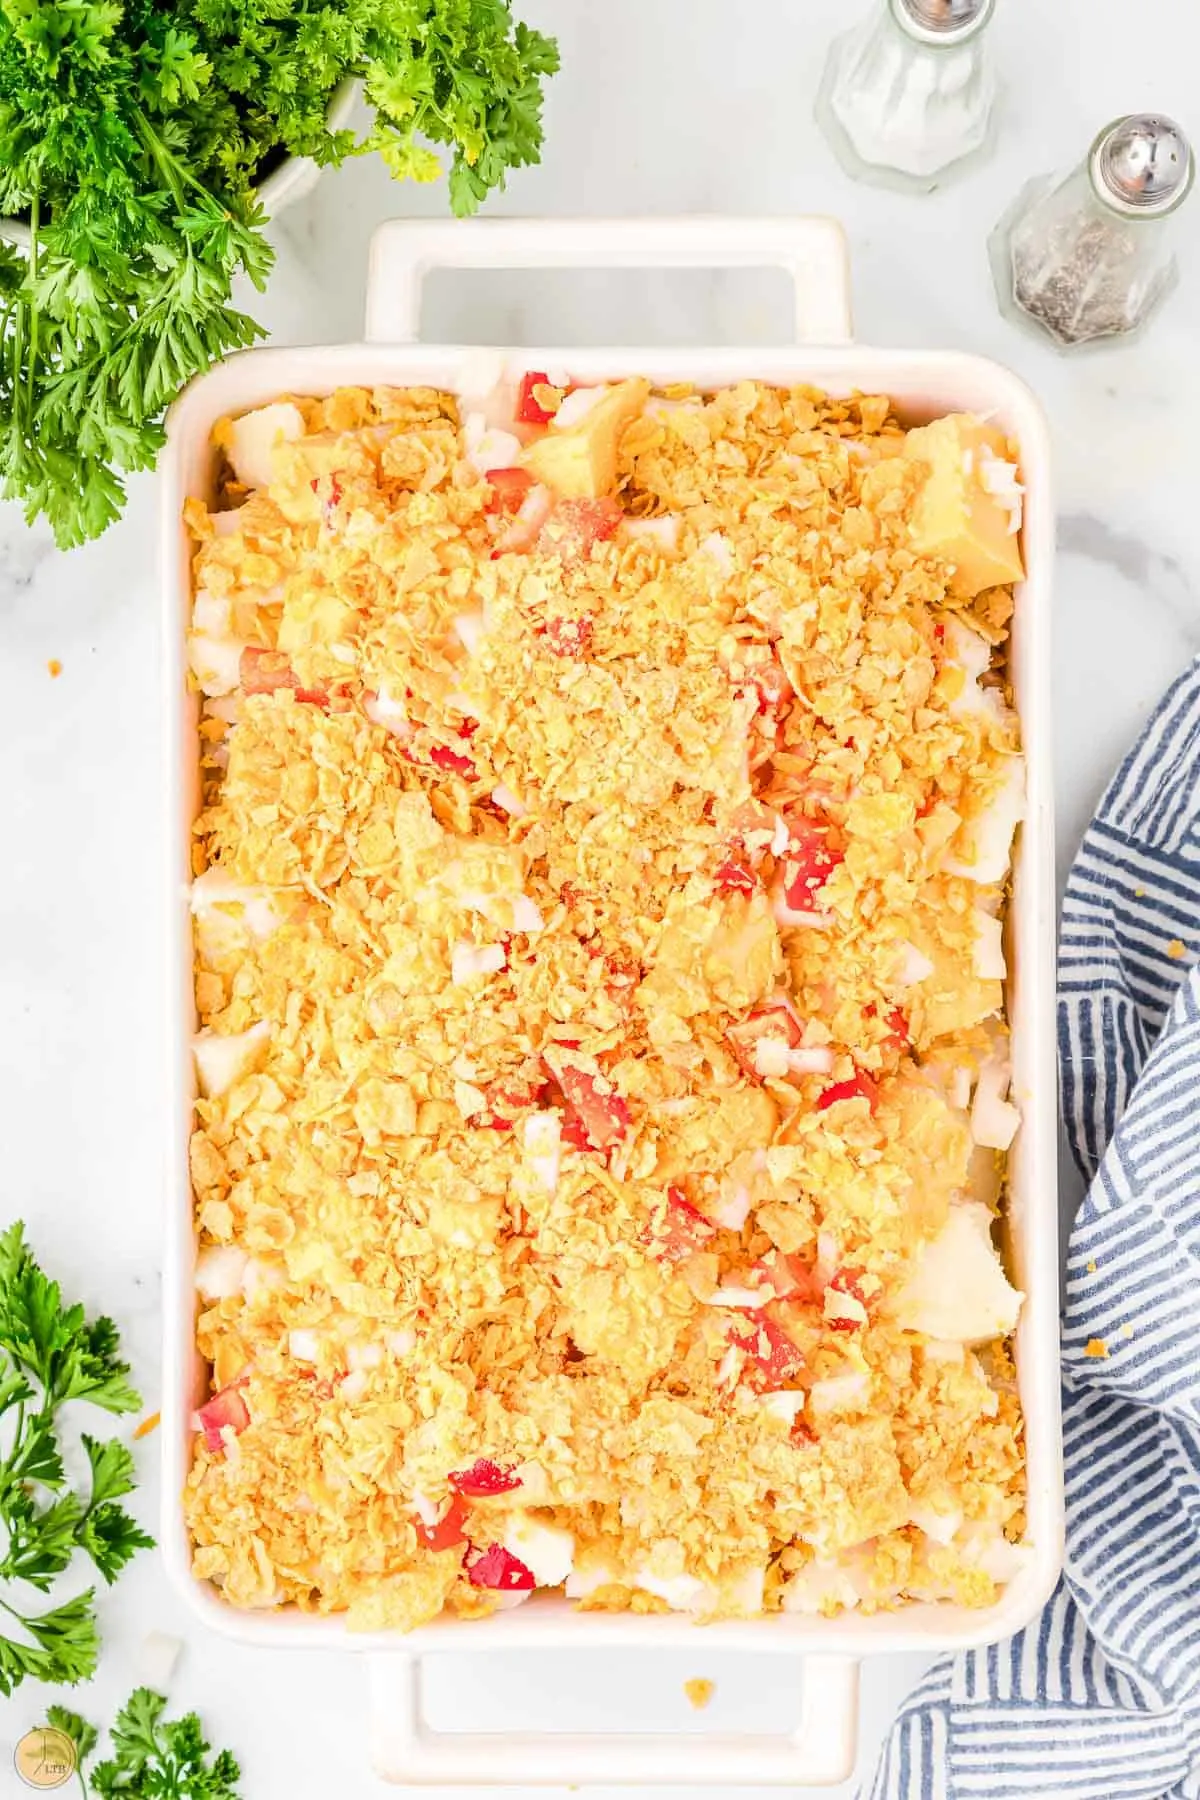 cornflakes on top of cheese and bell peppers casserole